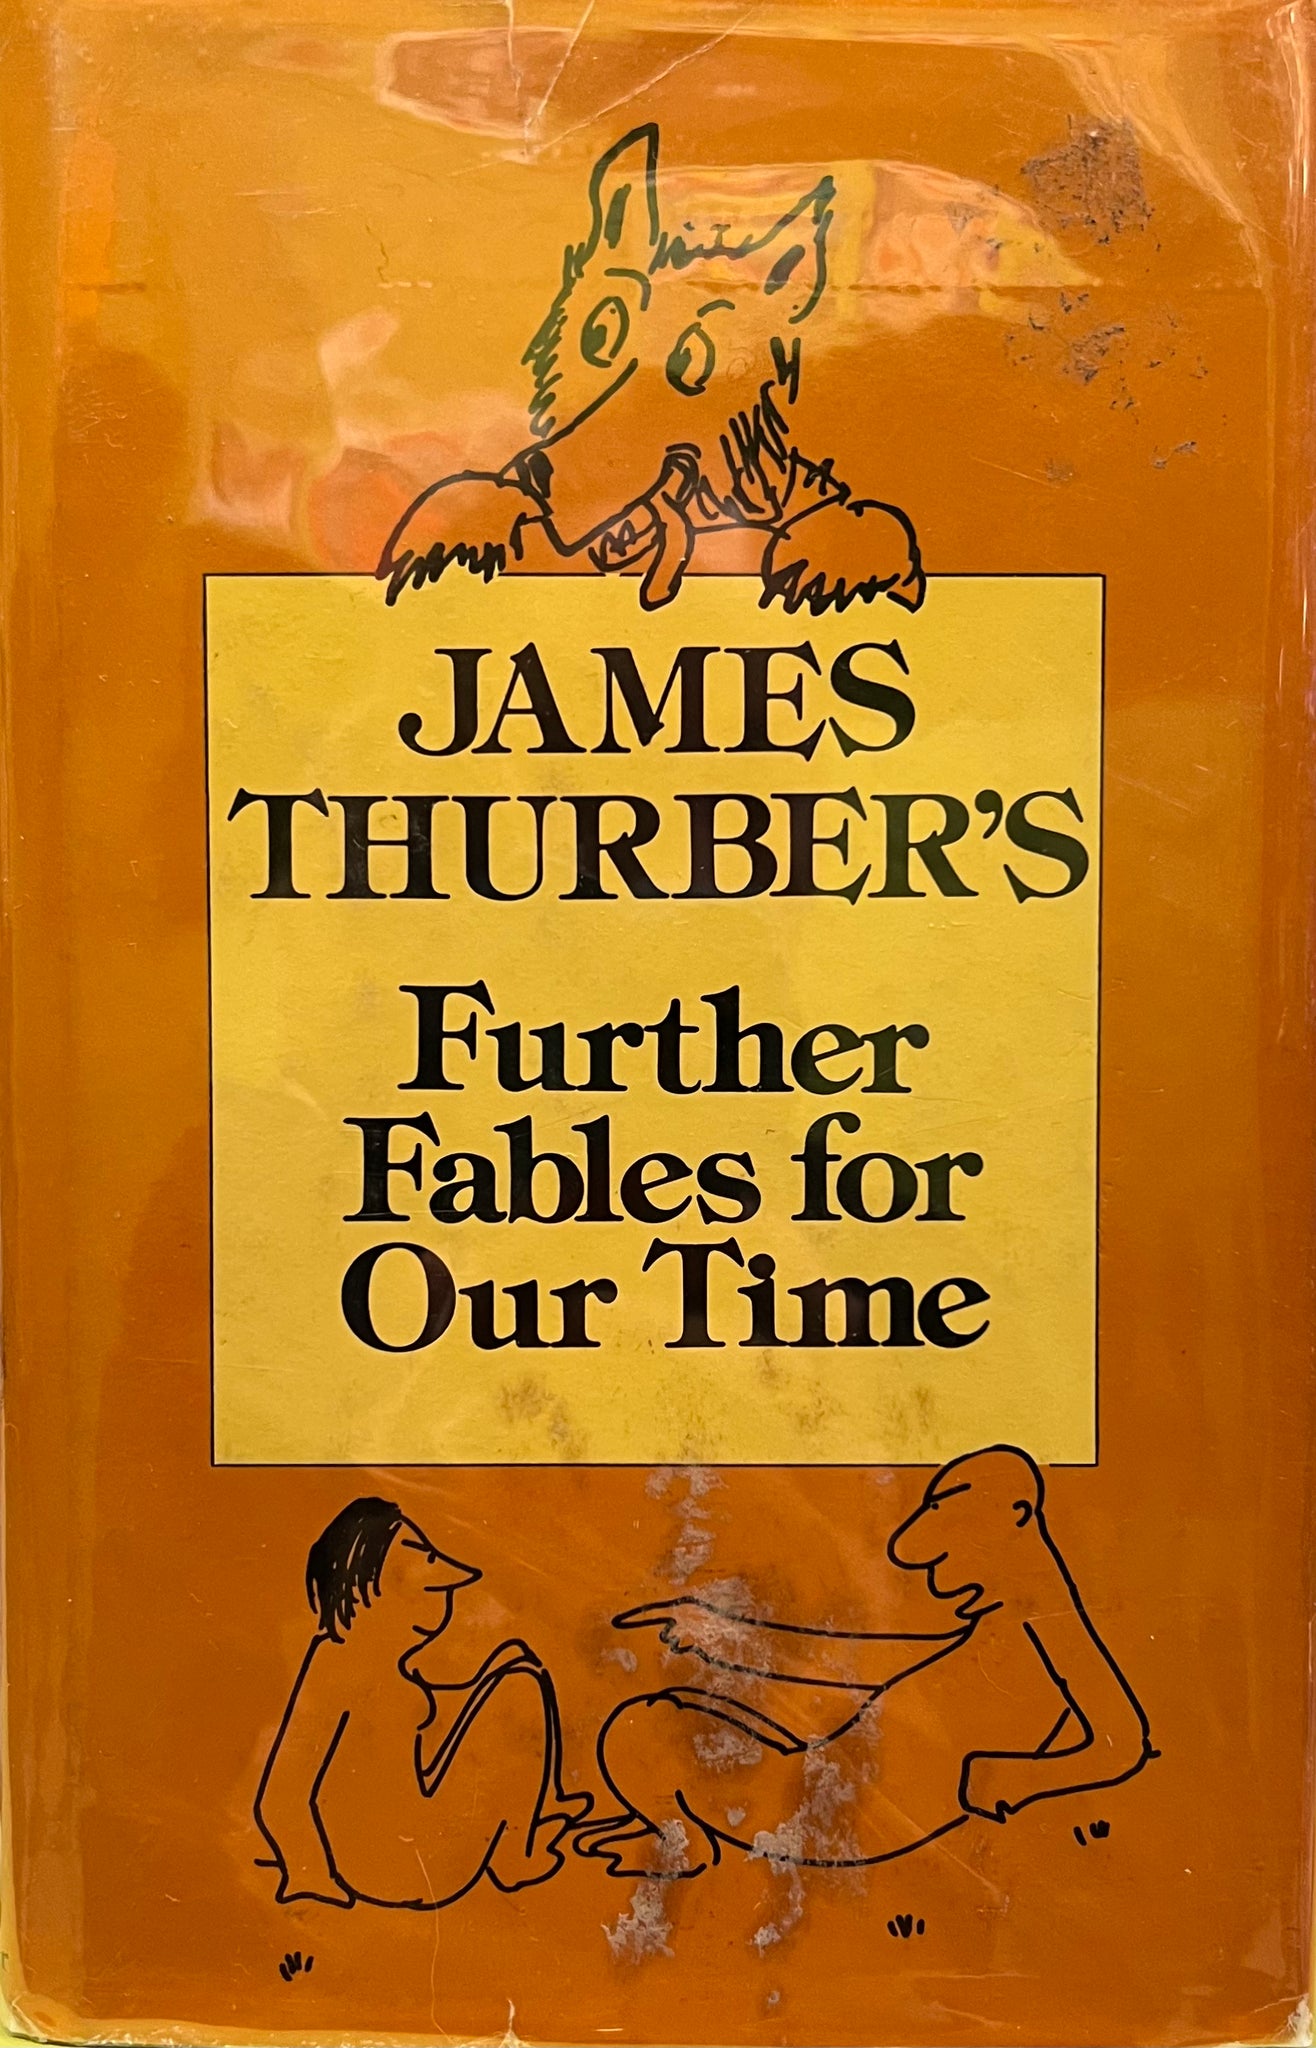 James Thurber’s Further Fables for Our Time